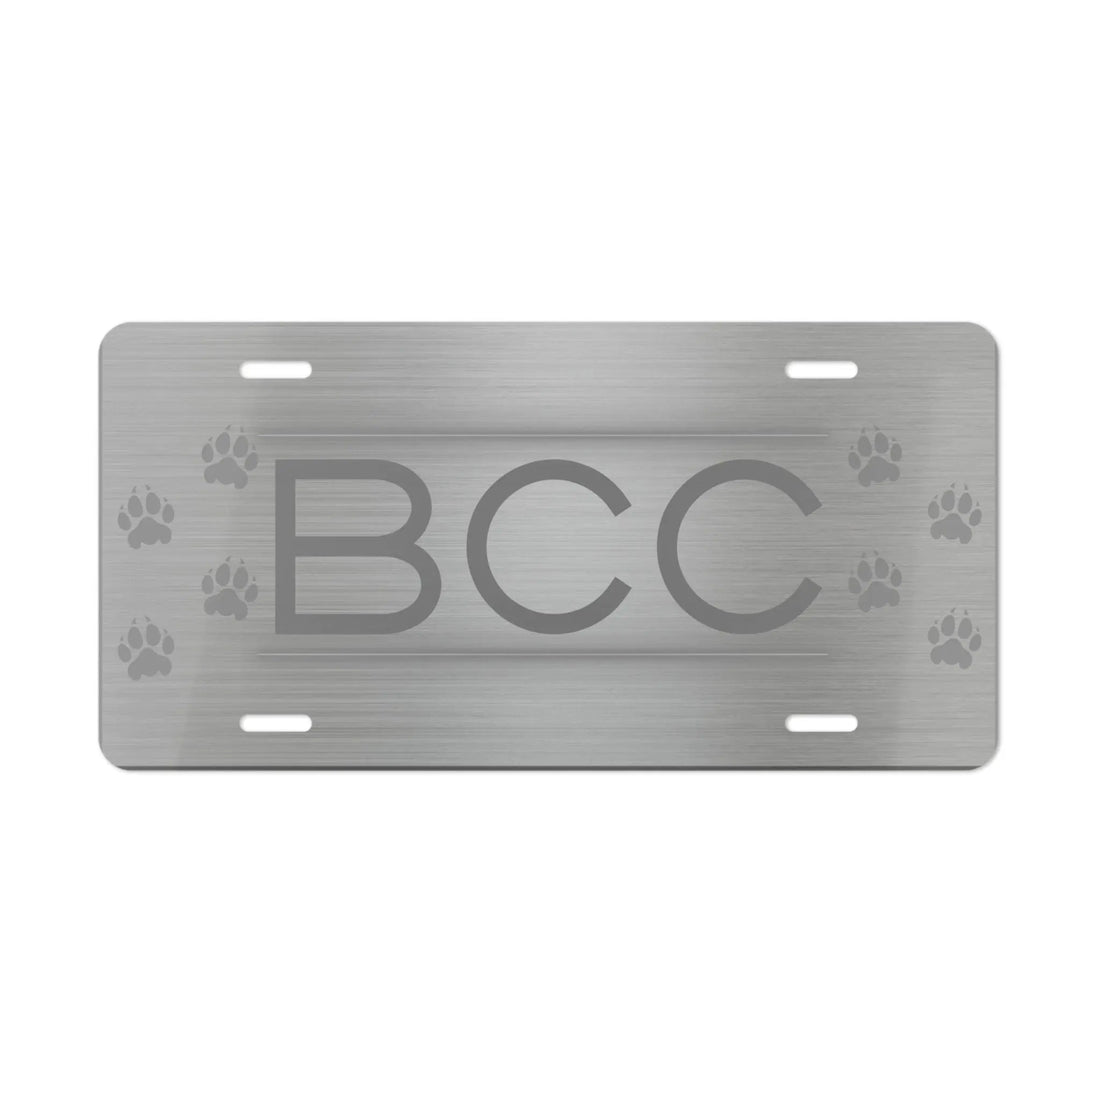 BCC Laser License Plate - Accessories - Positively Sassy - BCC Laser License Plate